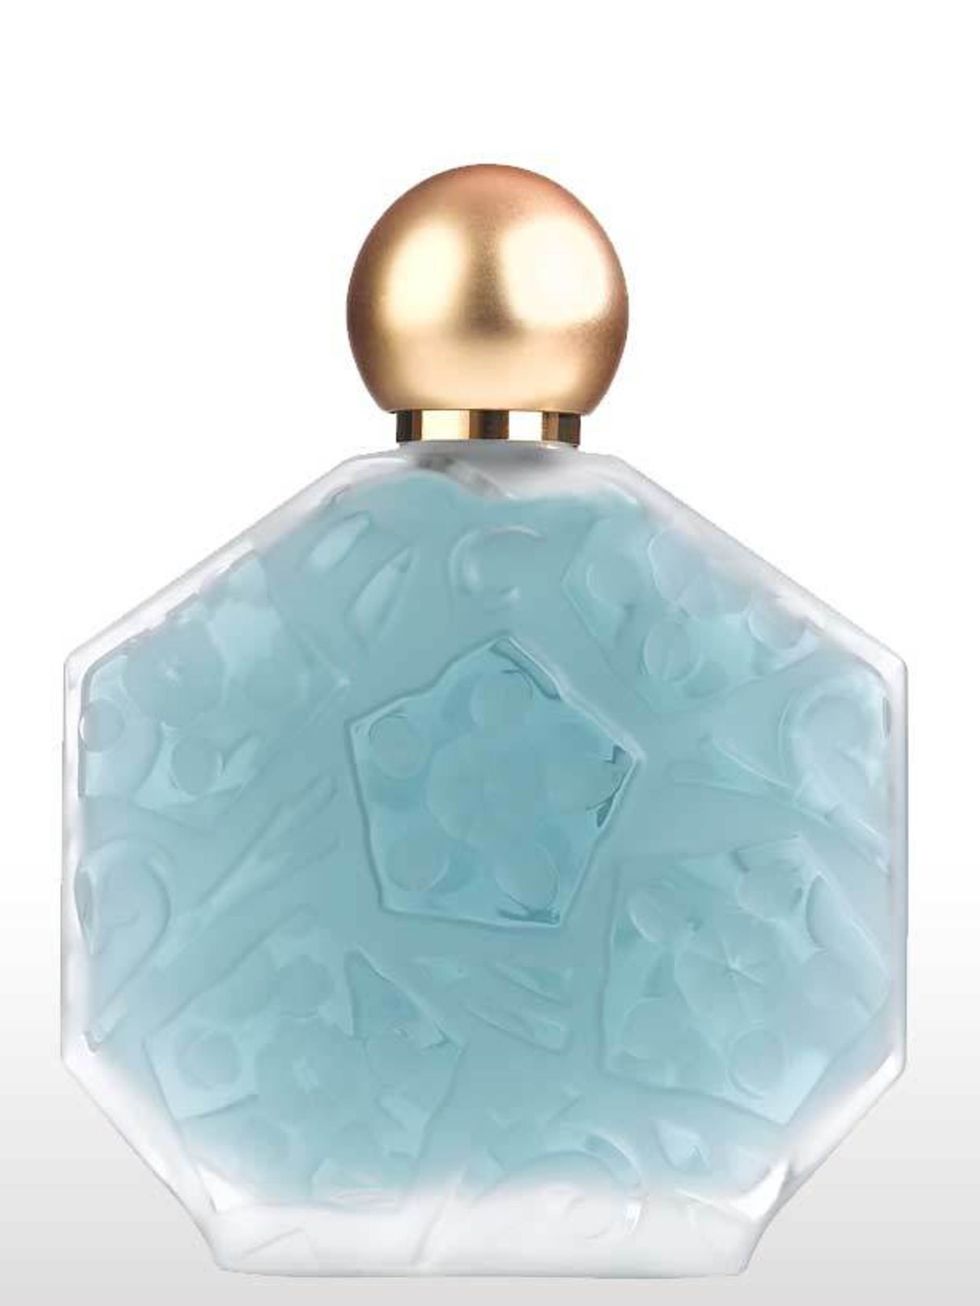 <p>Inspired by the scent of sun lotion on warmed skin, Jean-Charles Brosseau Fleurs dOmbre Bleue [£27 for 30ml edt] combines lingering notes of jasmine, orange blossom, vanilla and musk to create a fragrance that is perfect for a lazy afternoon on the b